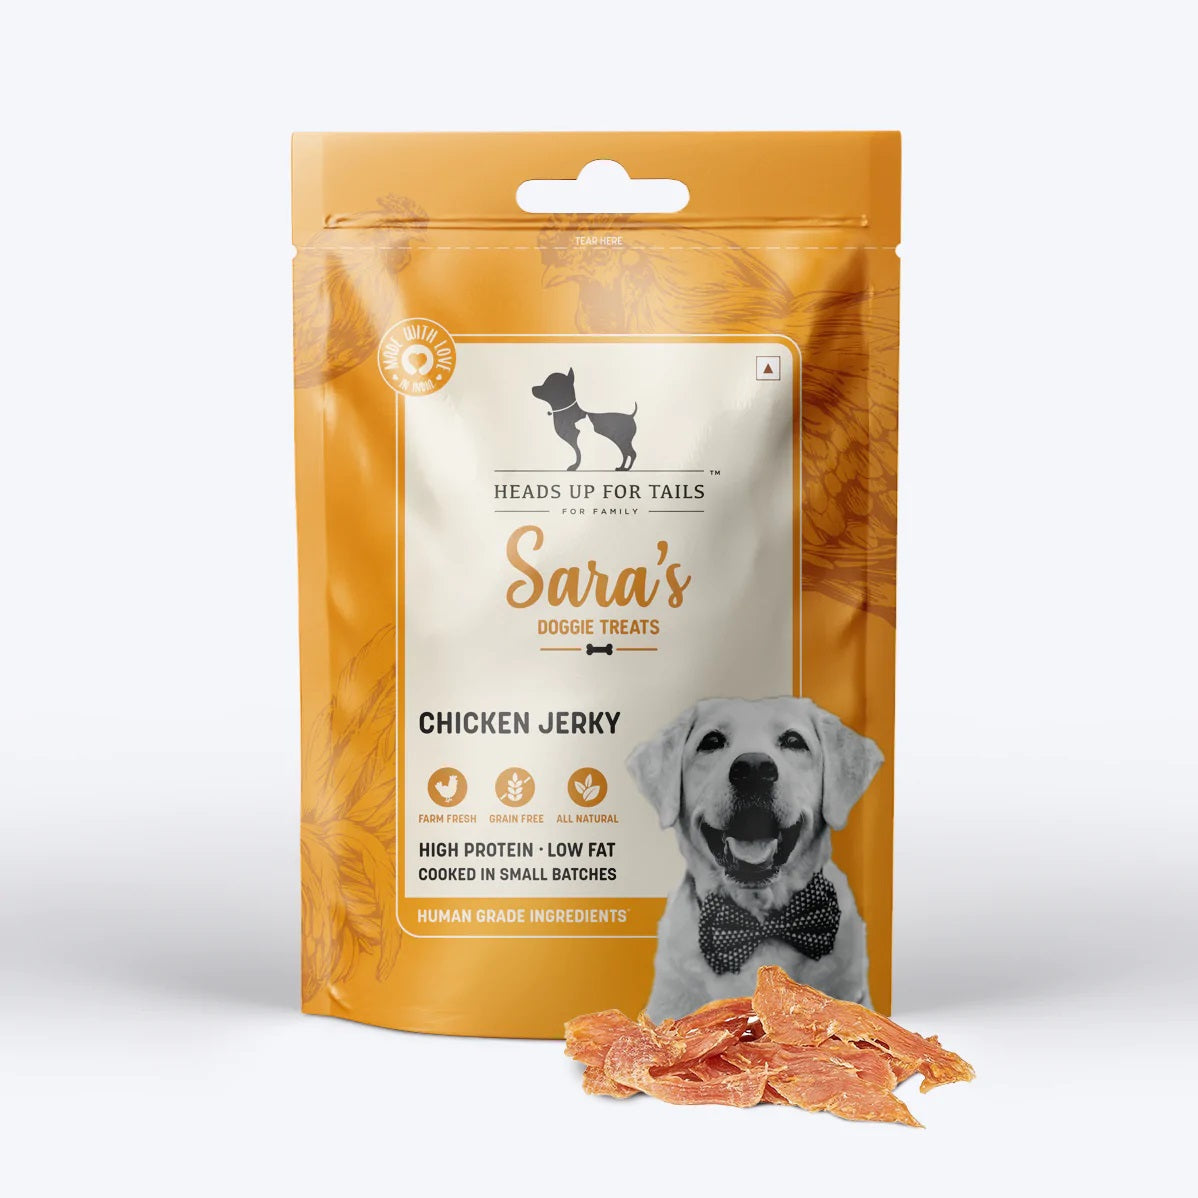 HUFT Sara's Doggie Treats Dog Treat Combo - Non-Veg (Pack of 6) - Heads Up For Tails